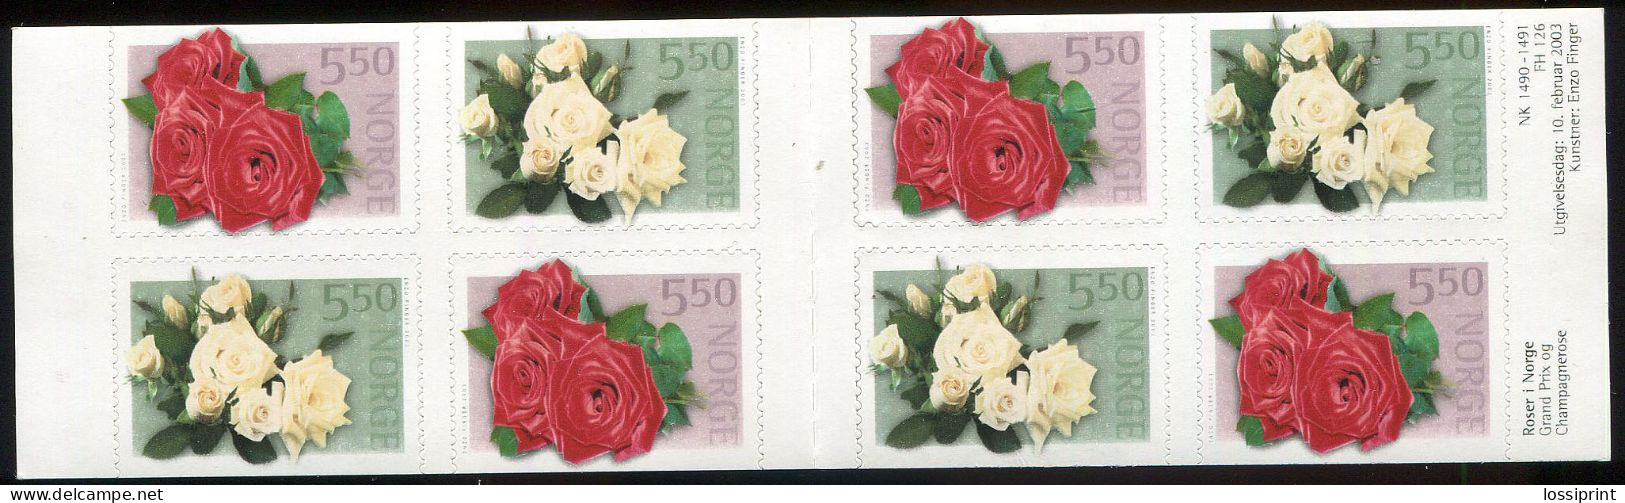 Norway:Unused Stamps Booklet Flowers, 2003, MNH - Rose